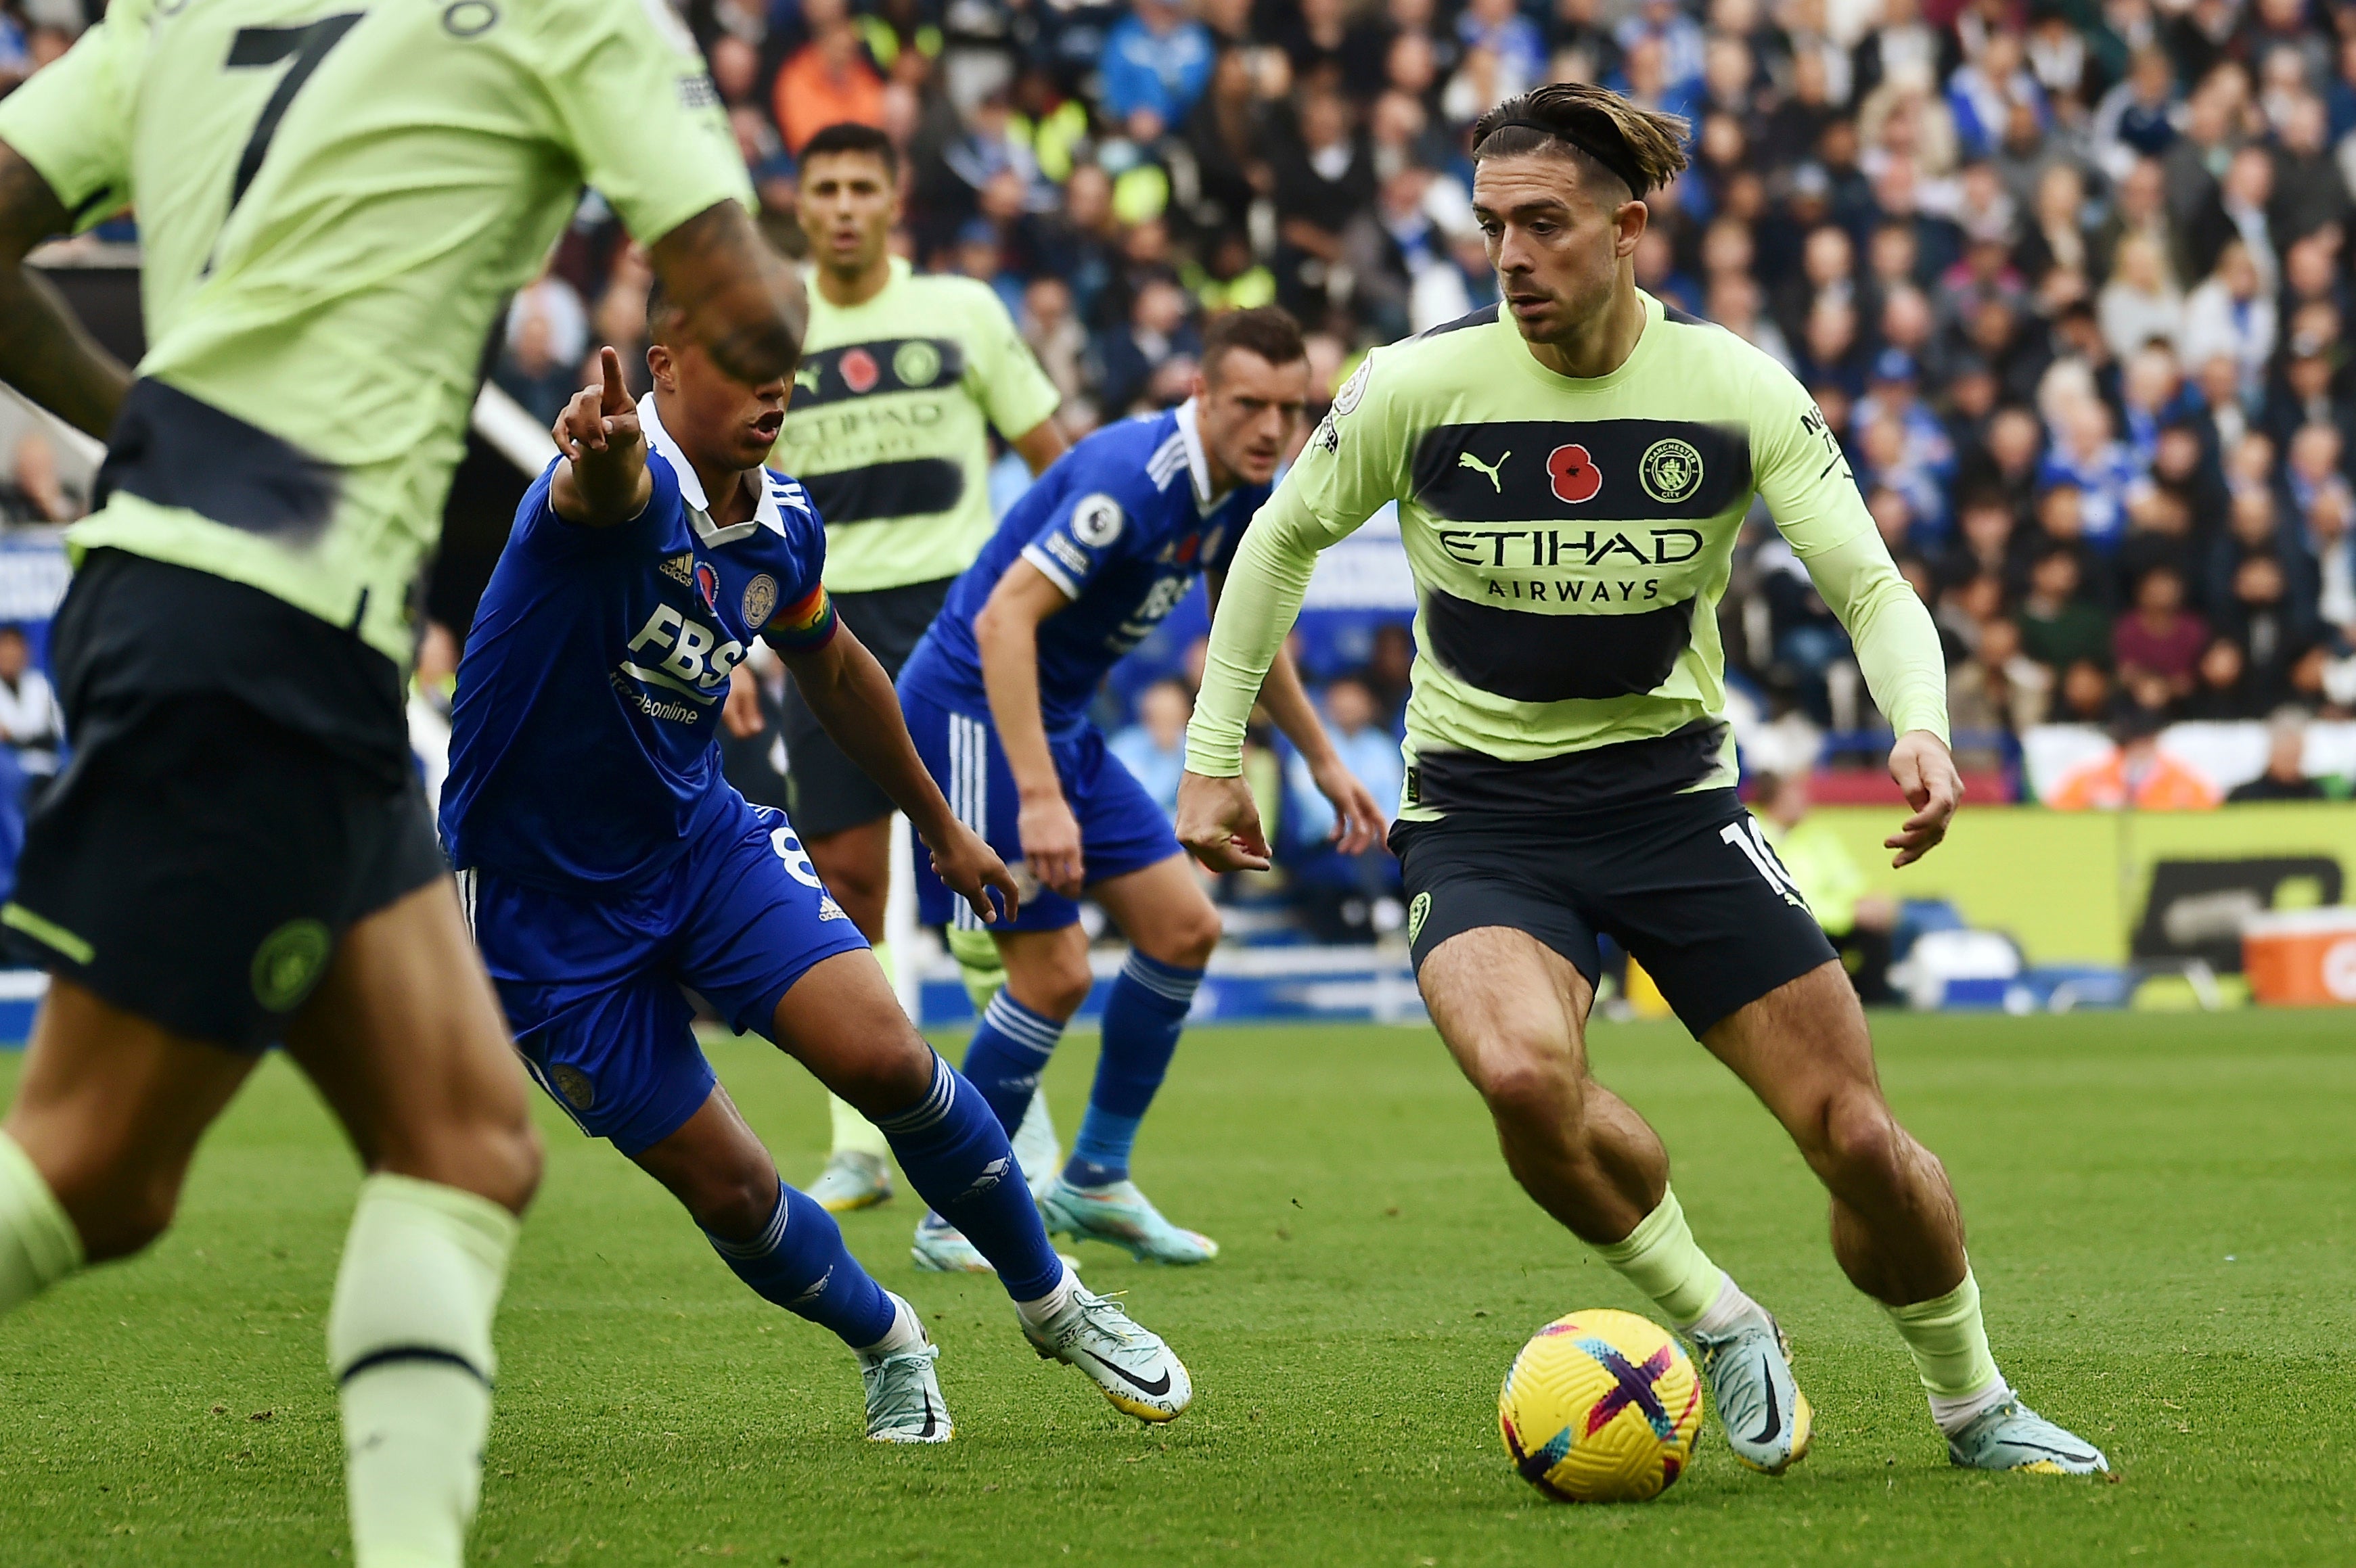 Manchester City's Jack Grealish, right, challenges for the ball with Leicester's Youri Tielemans